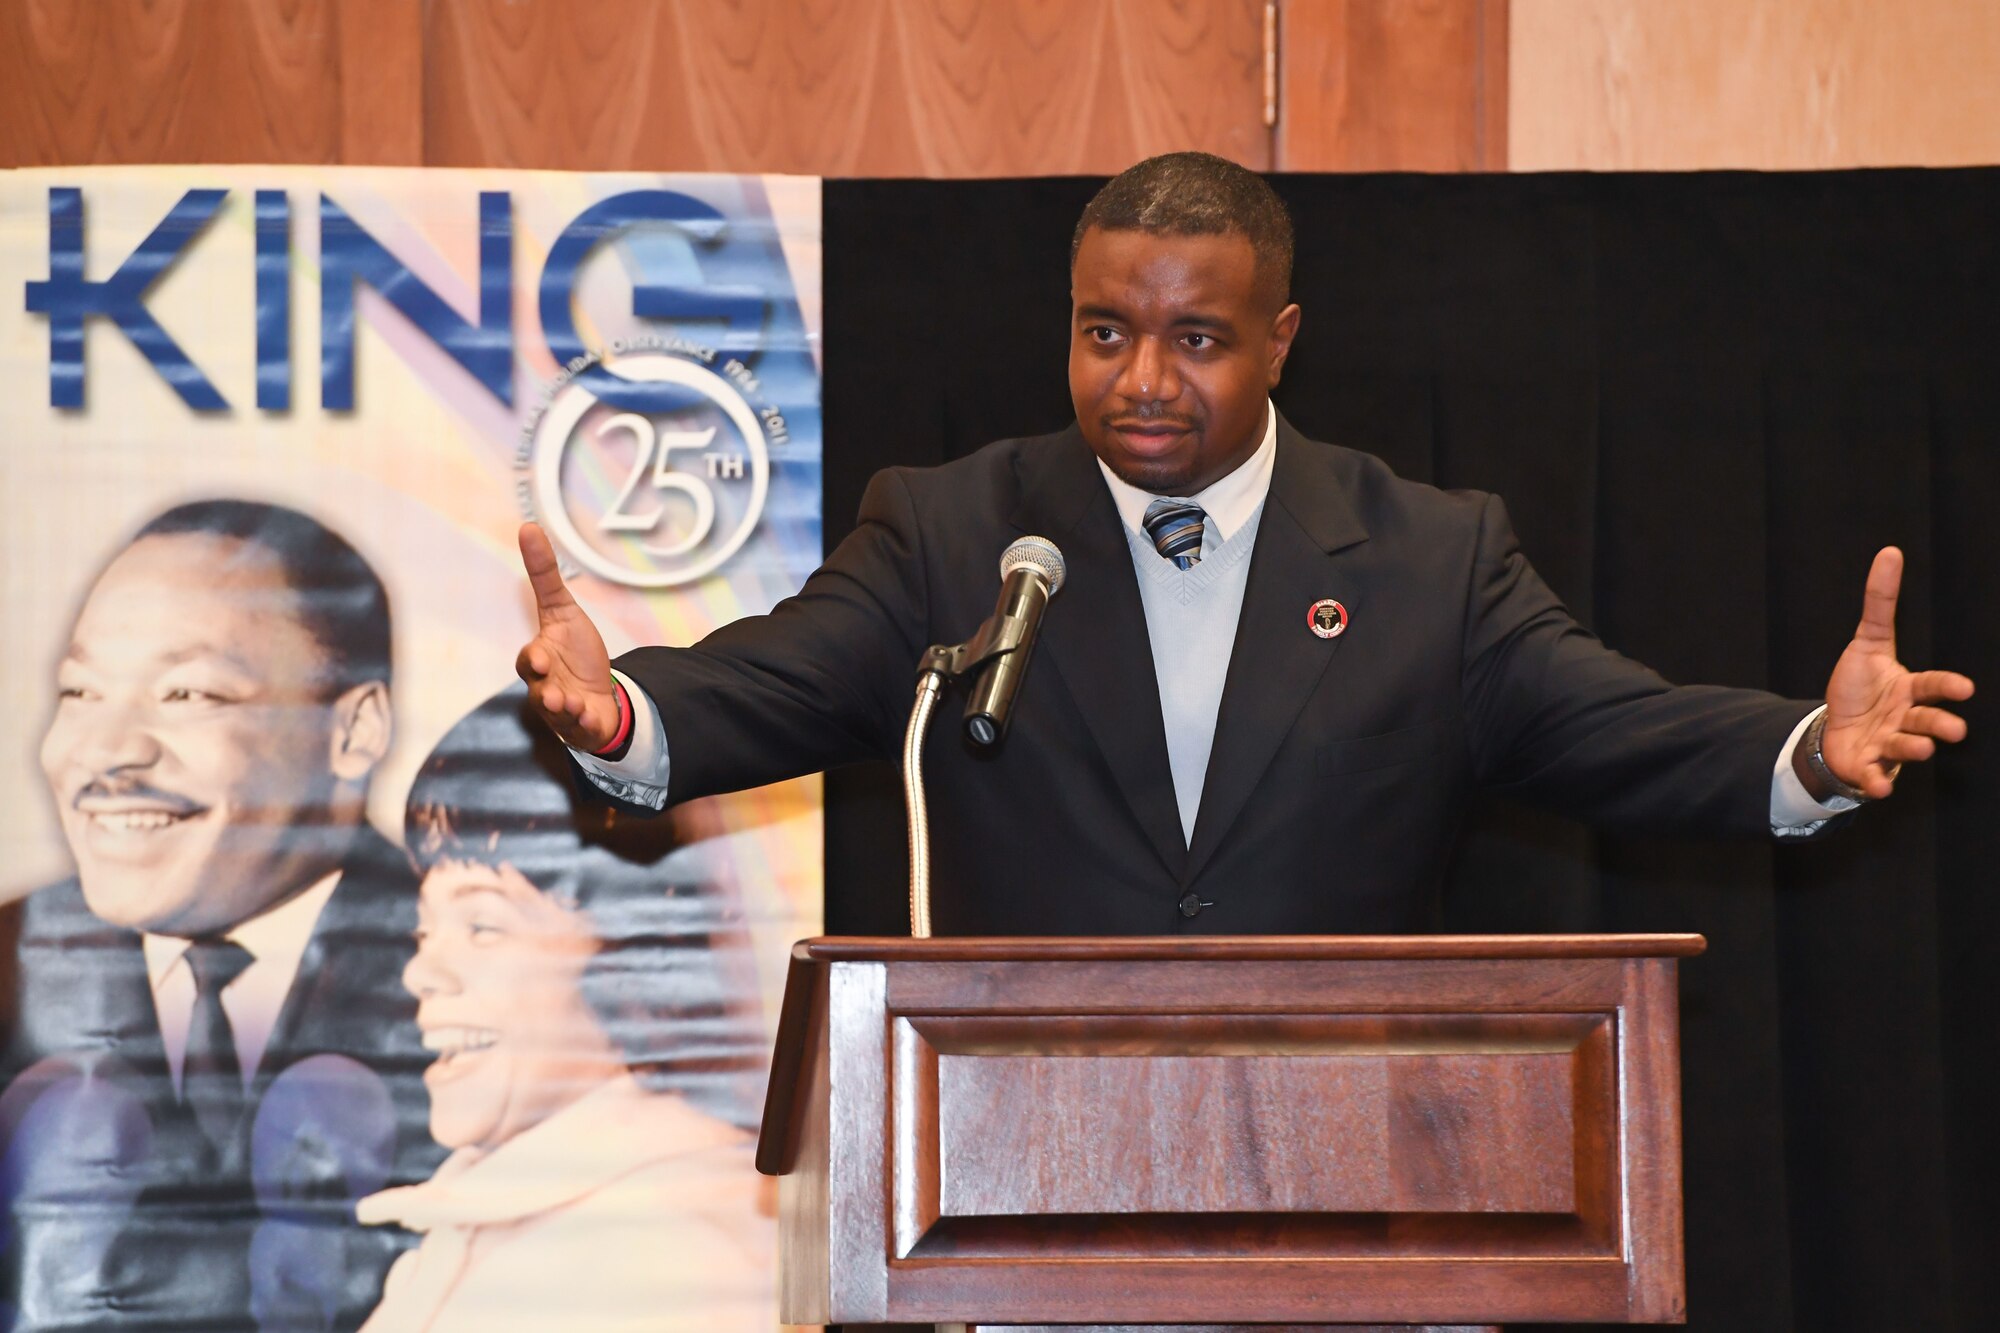 Dr. Wazir Suni Jefferson, Special Assistant to the Associate Vice President for Equity and Diversity at the University of Utah, speaks to attendees at the Martin Luther King, Jr. Commemoration Luncheon held Jan. 17, 2018, at Hill Air Force Base, Utah. (U.S. Air Force photo by Cynthia Griggs)